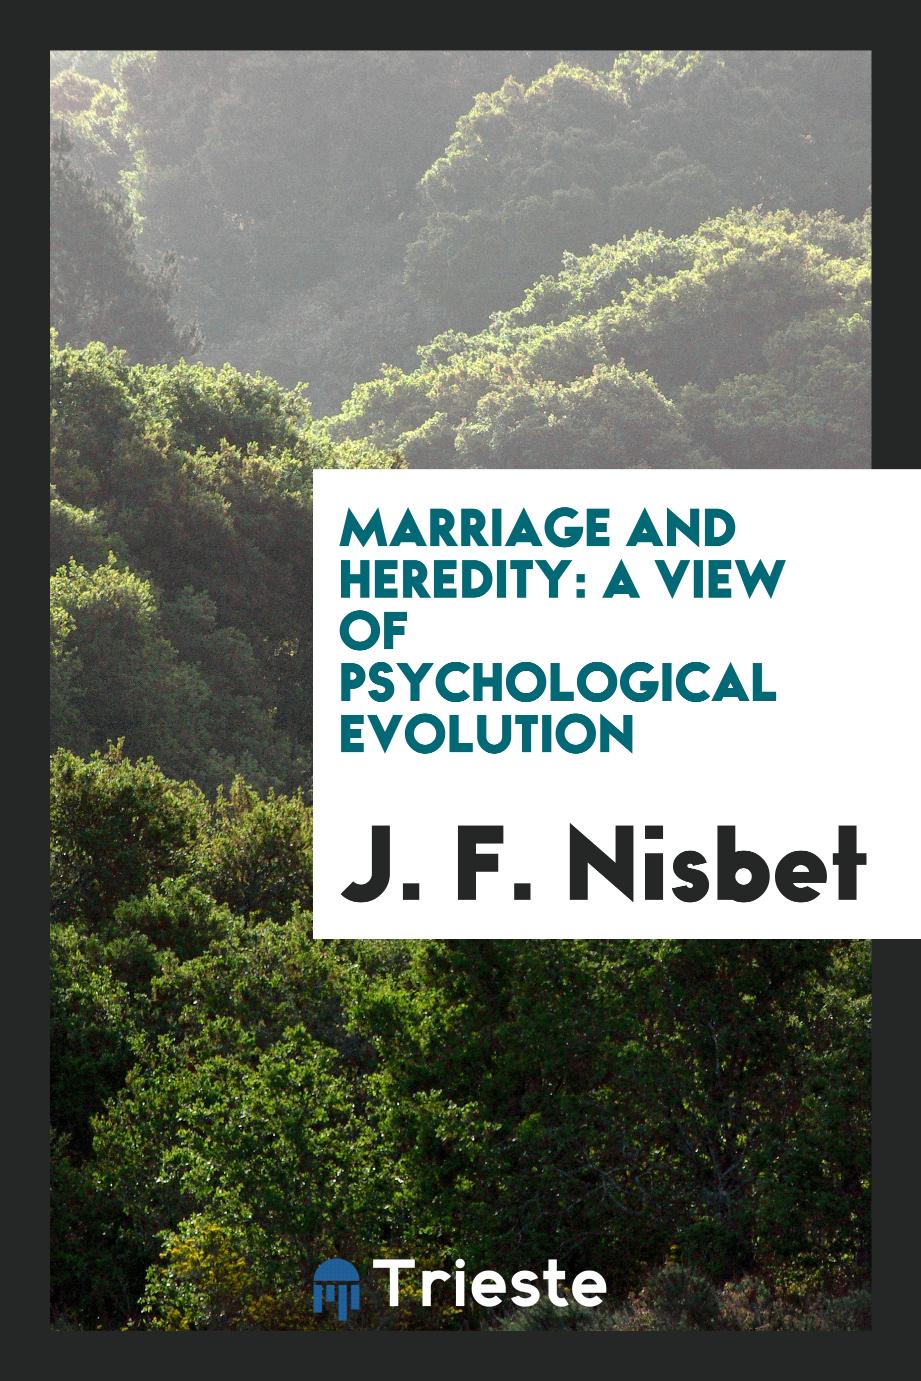 Marriage and Heredity: A View of Psychological Evolution